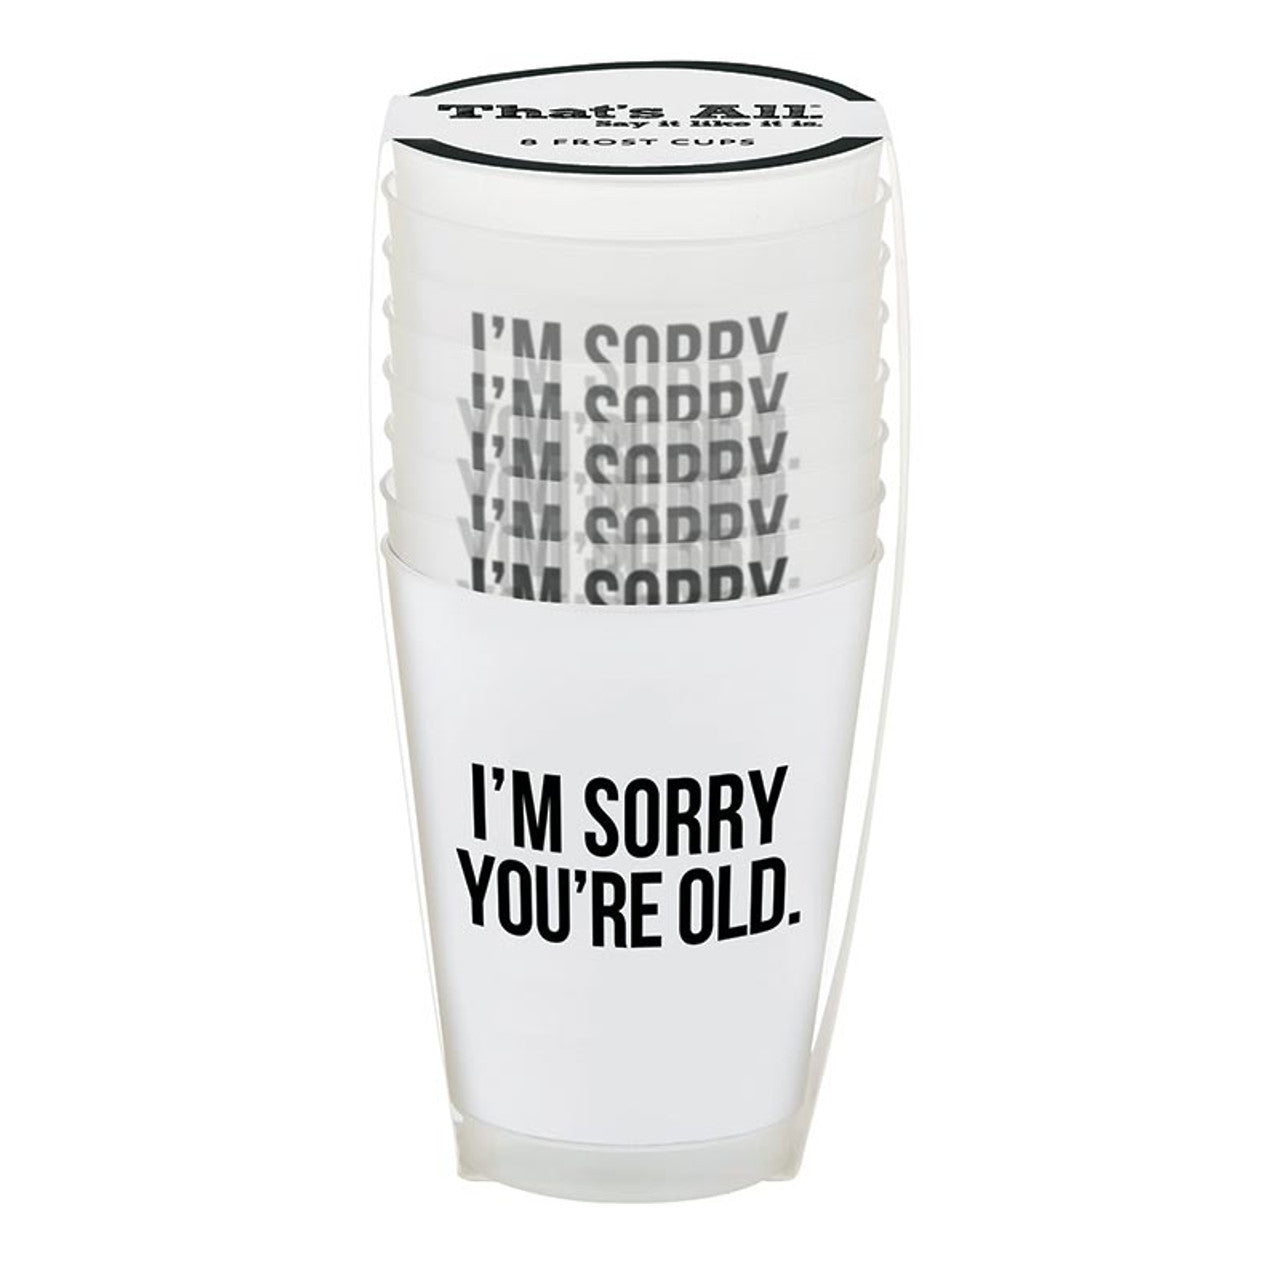 SORRY YOU'RE OLD FROST CUP | 8PACK-Home-SANTA BARBARA DESIGN STUDIO-Coriander